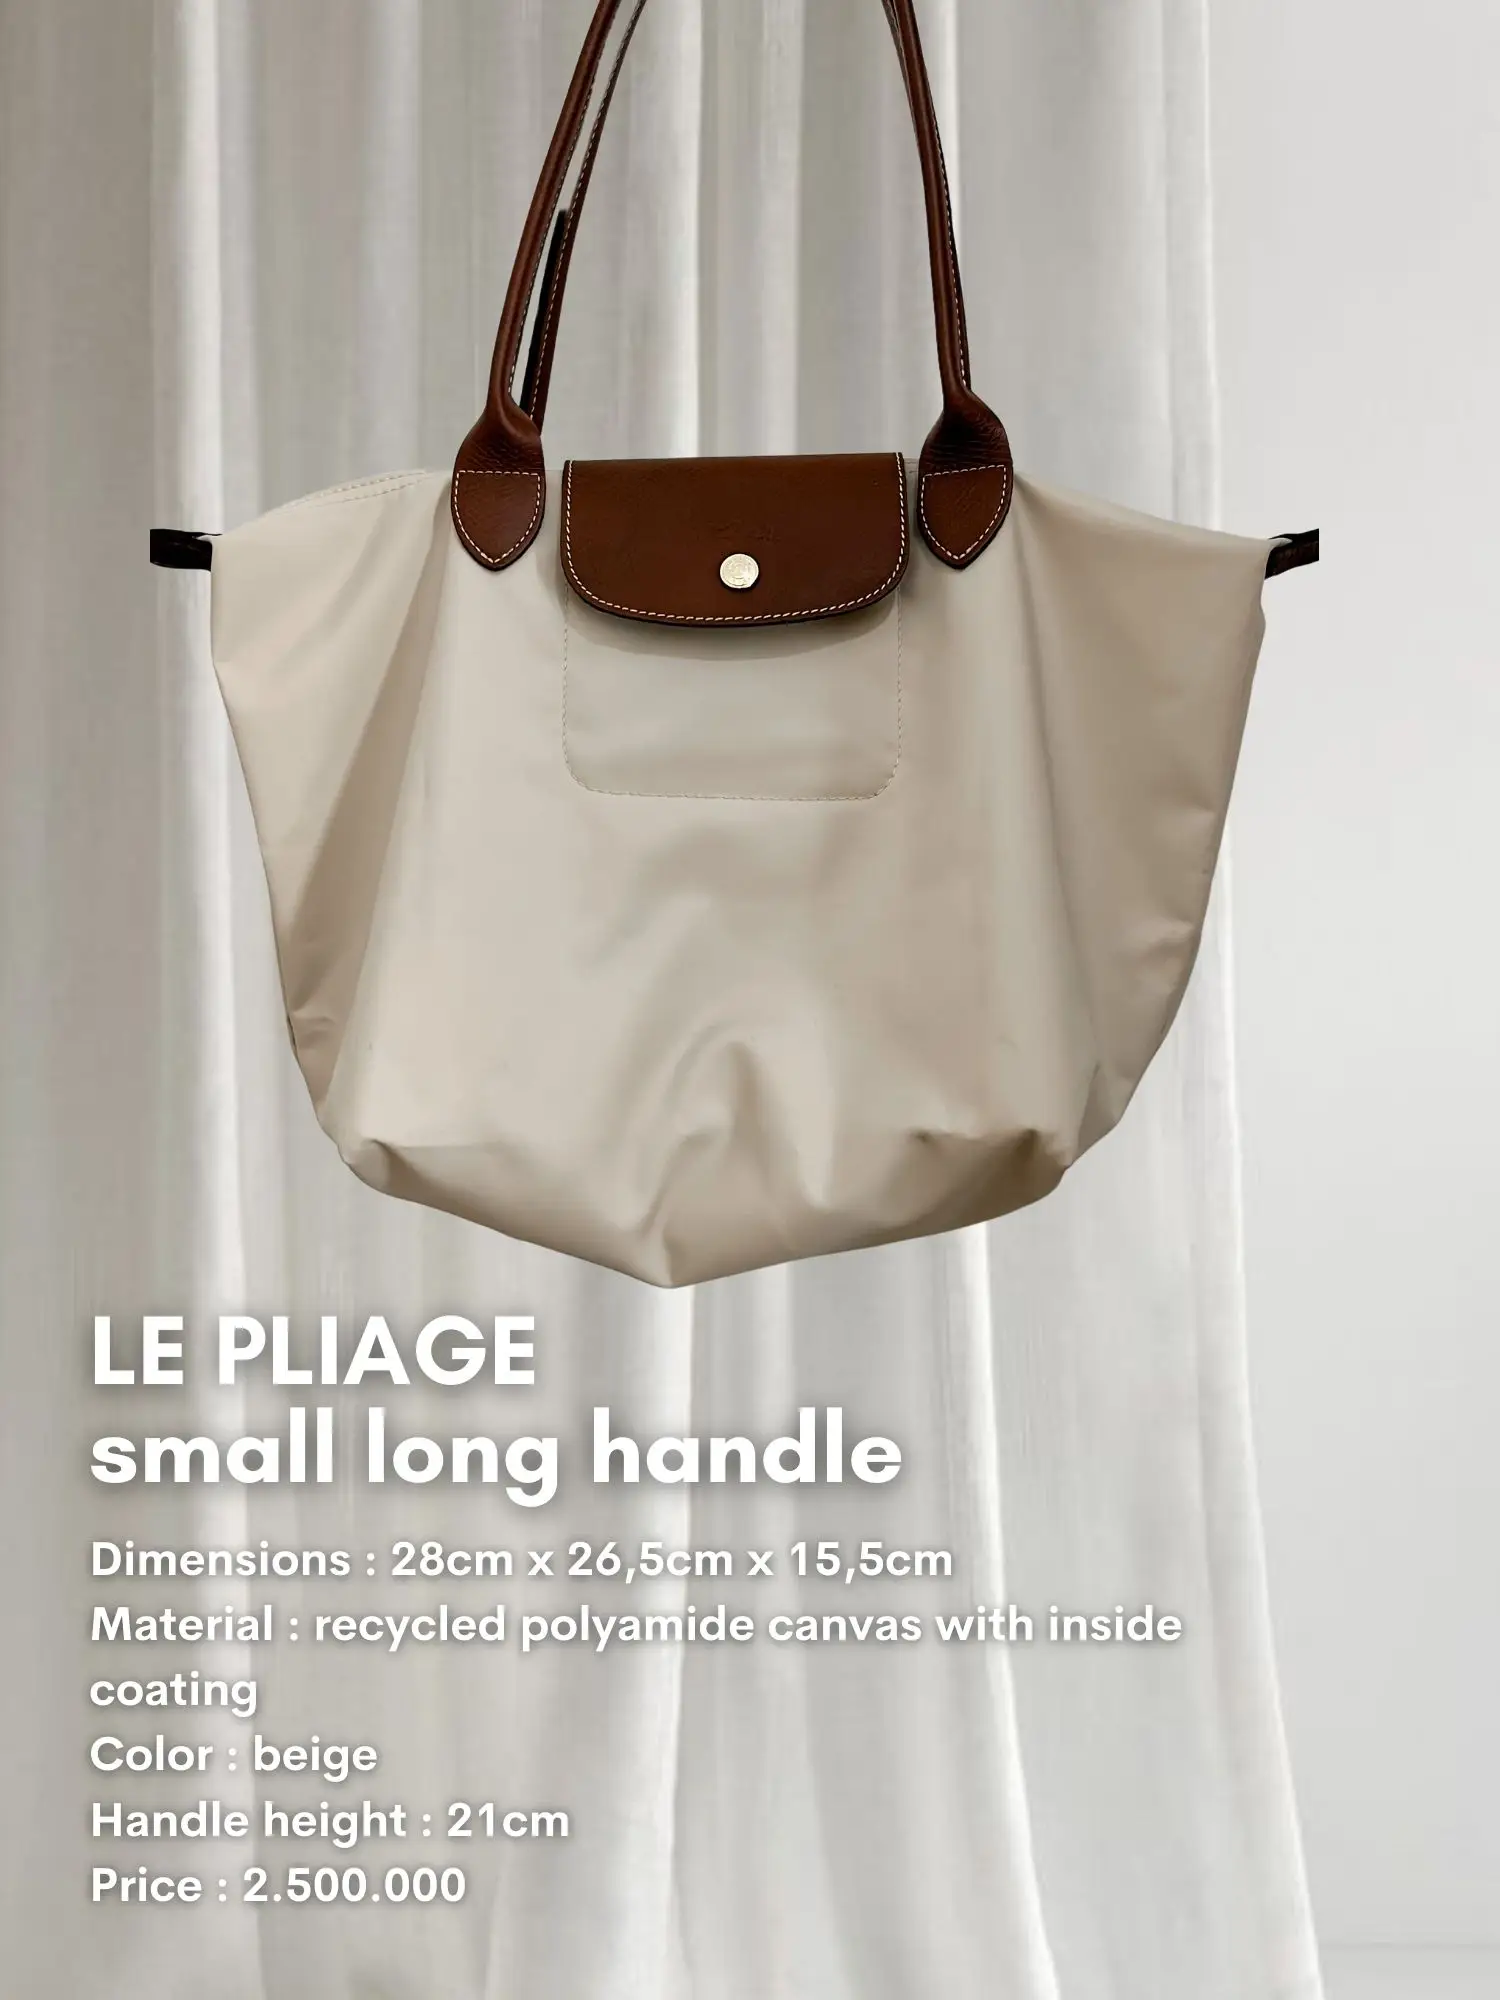 Longchamp Bag Cheaper in Tokyo?!  Gallery posted by Monica Trisha